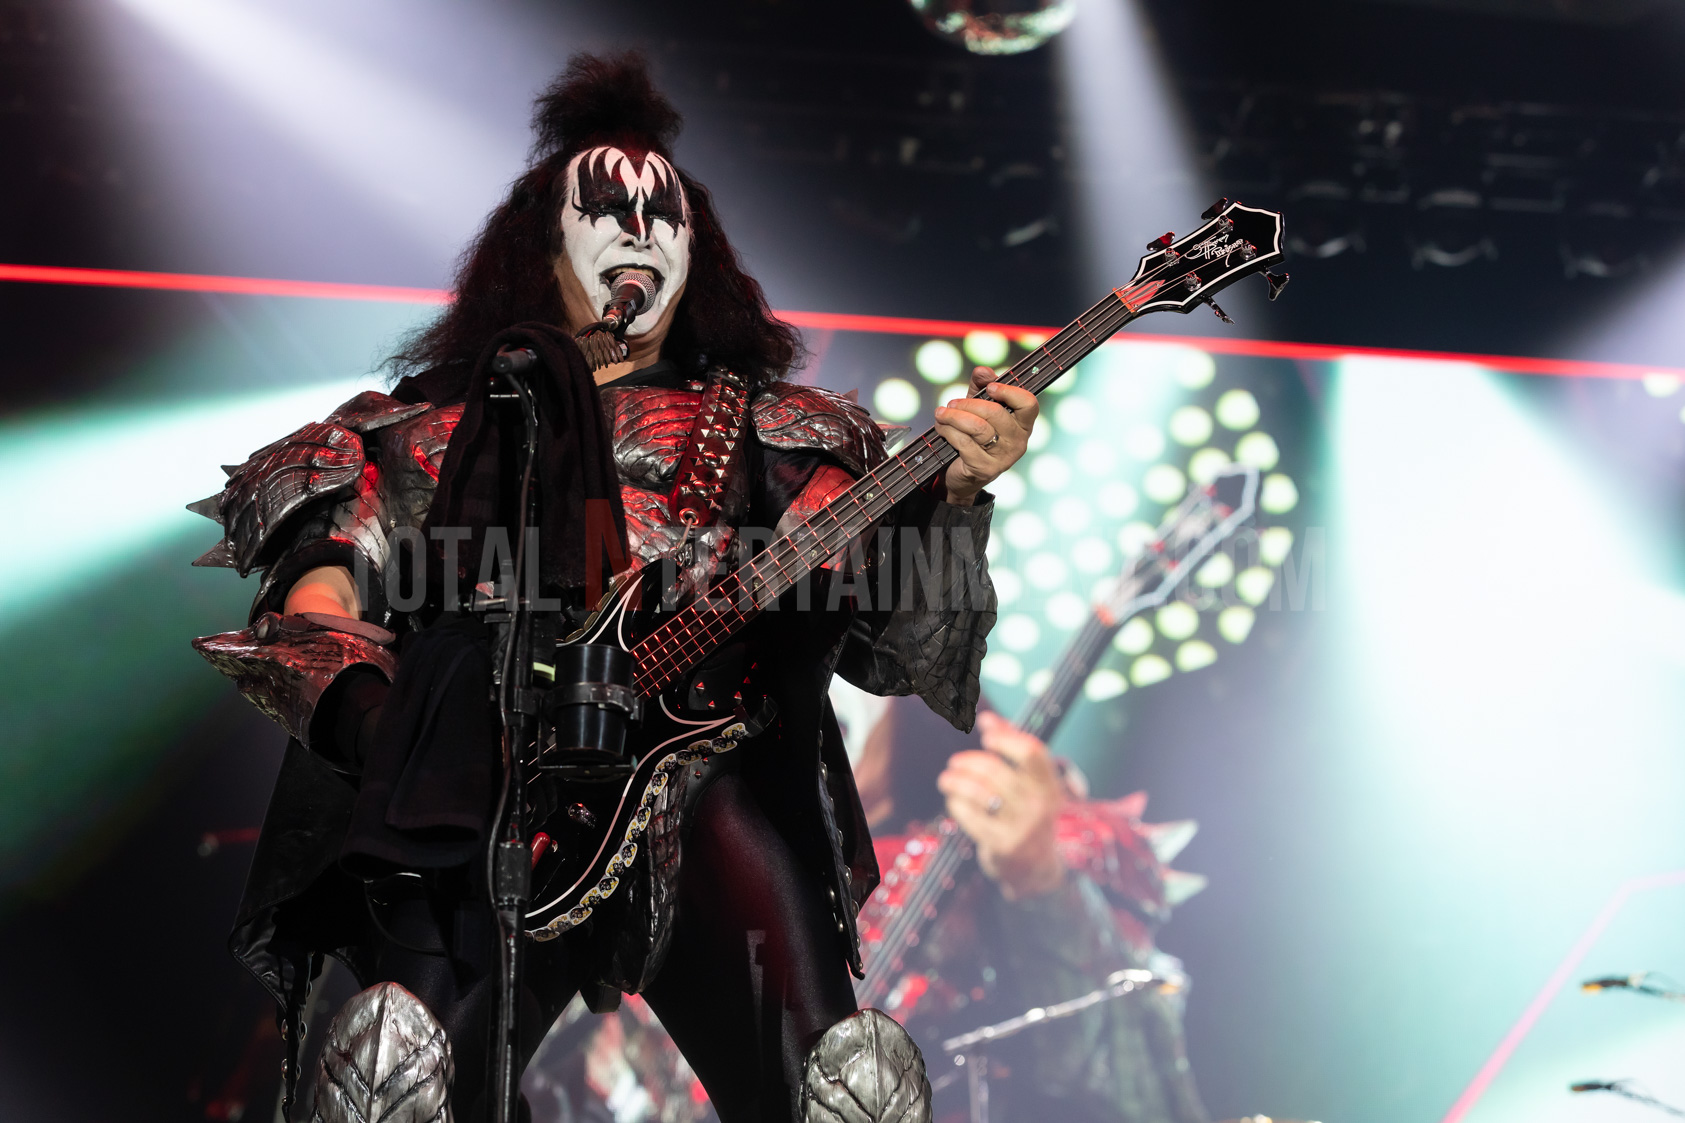 Jo Forrest, Live Event, Music Photography, Totalntertainment, KISS, Music Photography, Newcastle